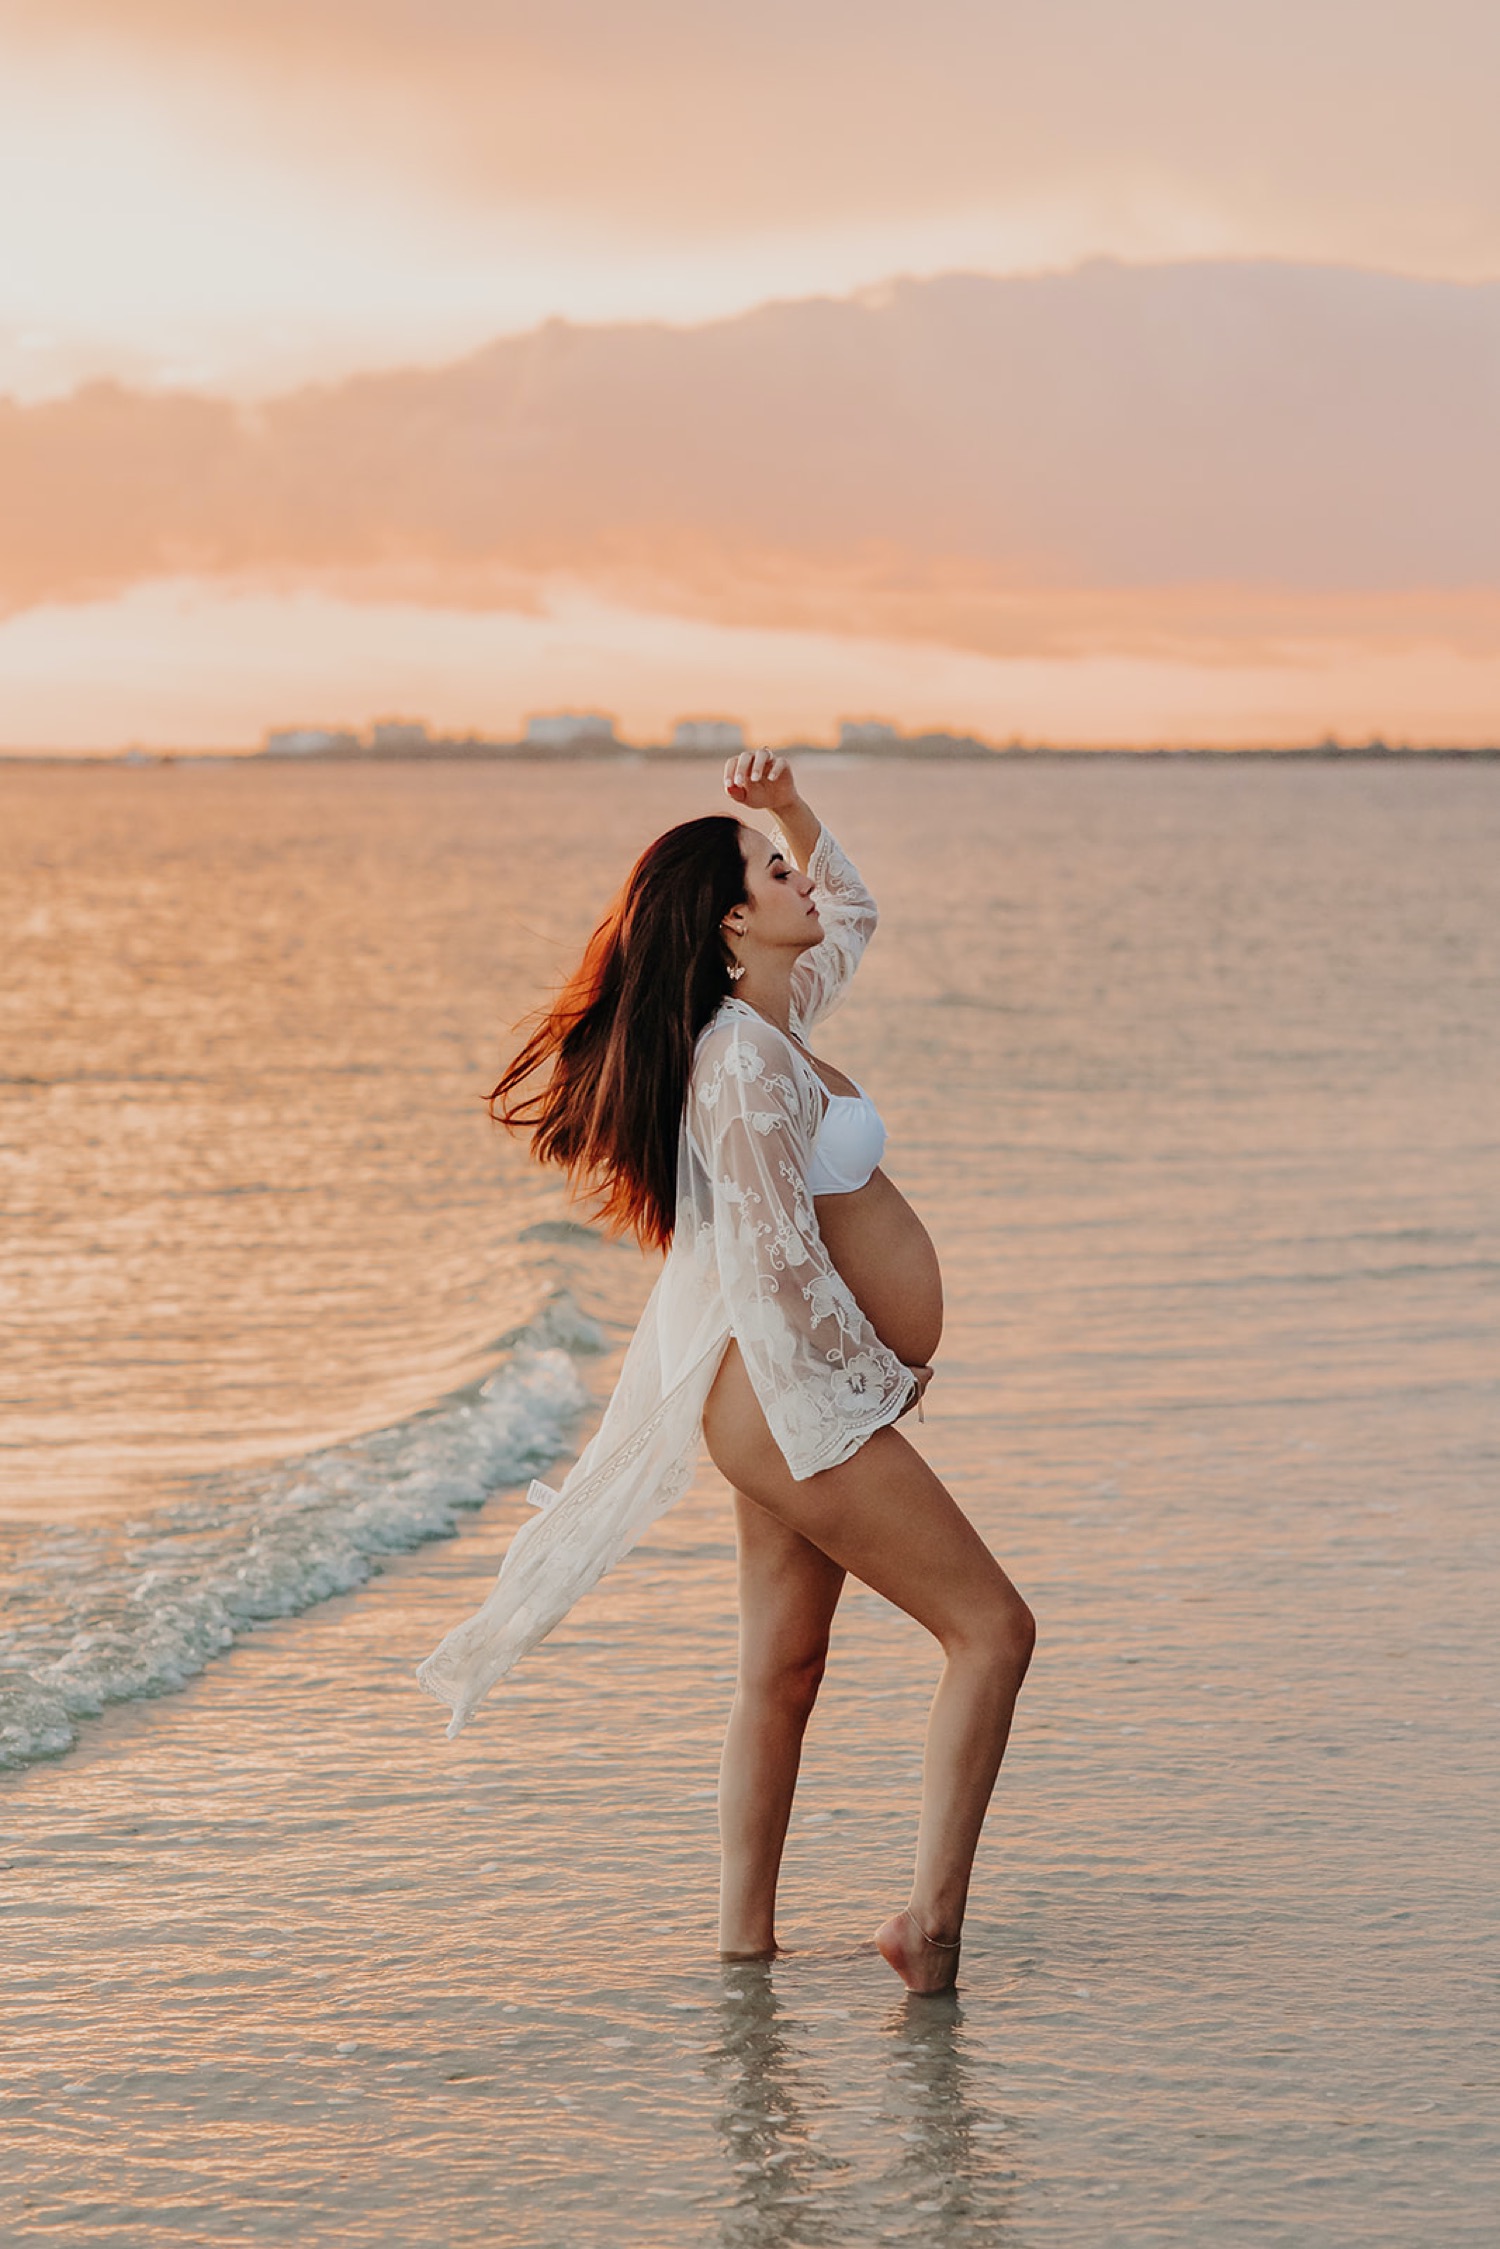 35 Maternity Poses Every Mom-To-Be Needs At Photoshoot | Maternity  photography poses, Maternity photoshoot poses, Pregnancy photoshoot